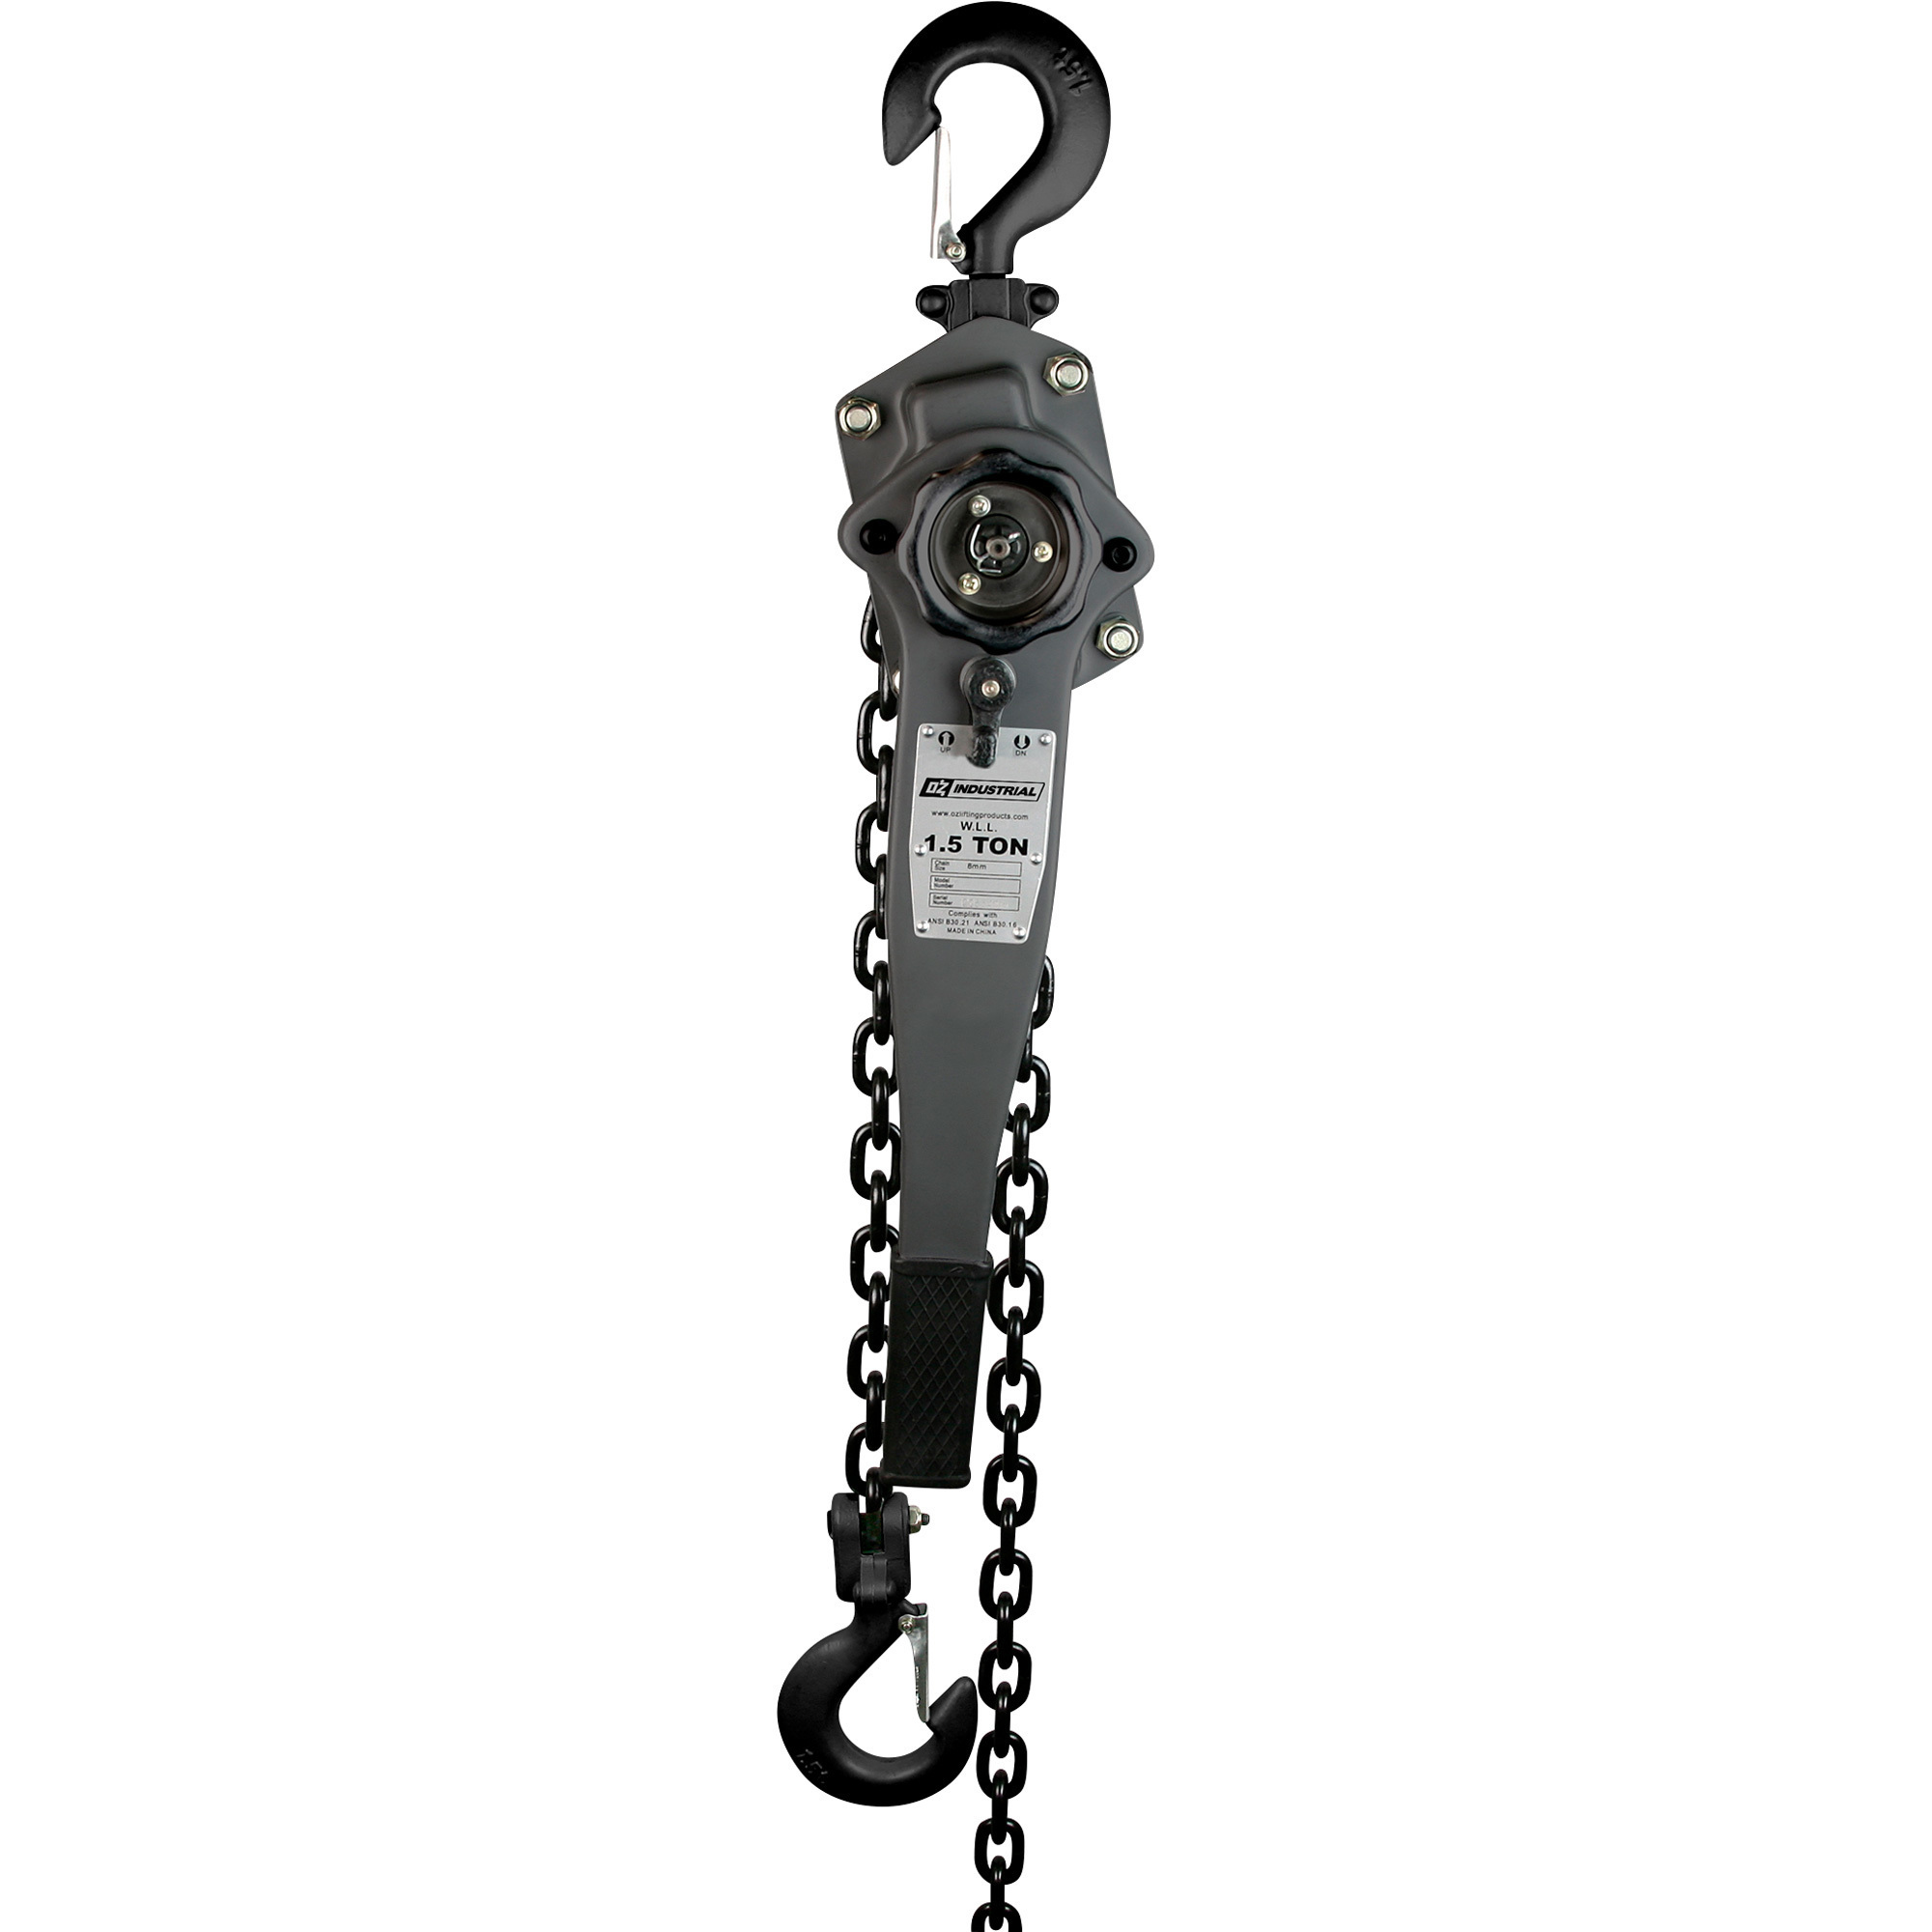 OZ Lifting Products Industrial Series Manual Lever Hoist â 1 1/2-Ton Capacity, 5ft. Lift, Model OZIND150-5LH